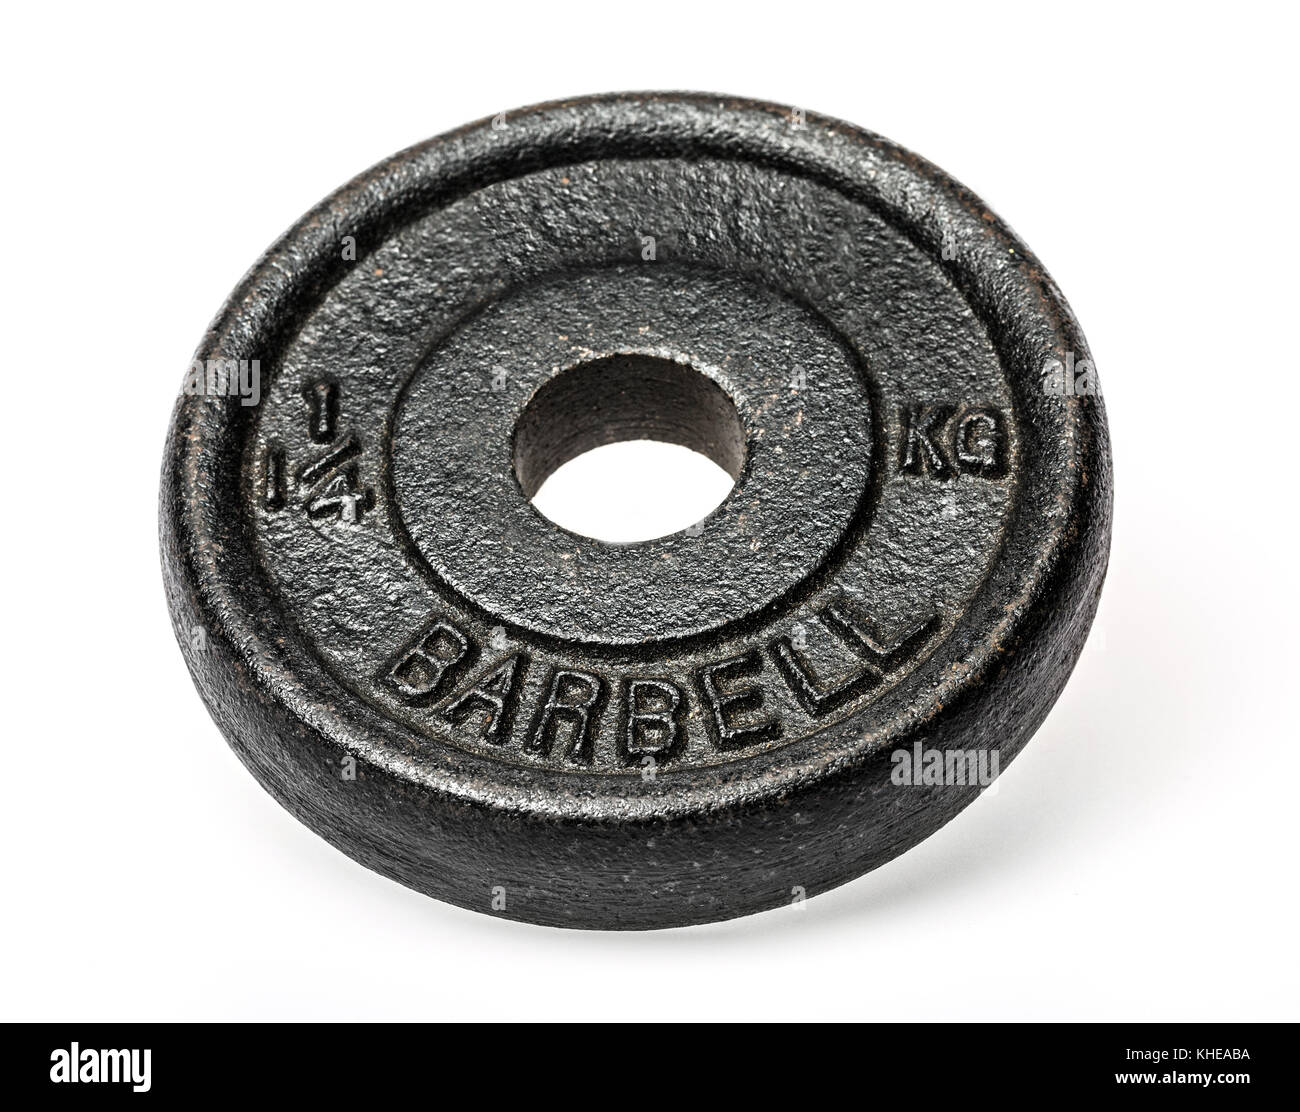 Barbell or Dumbbell weight on white background Stock Photo